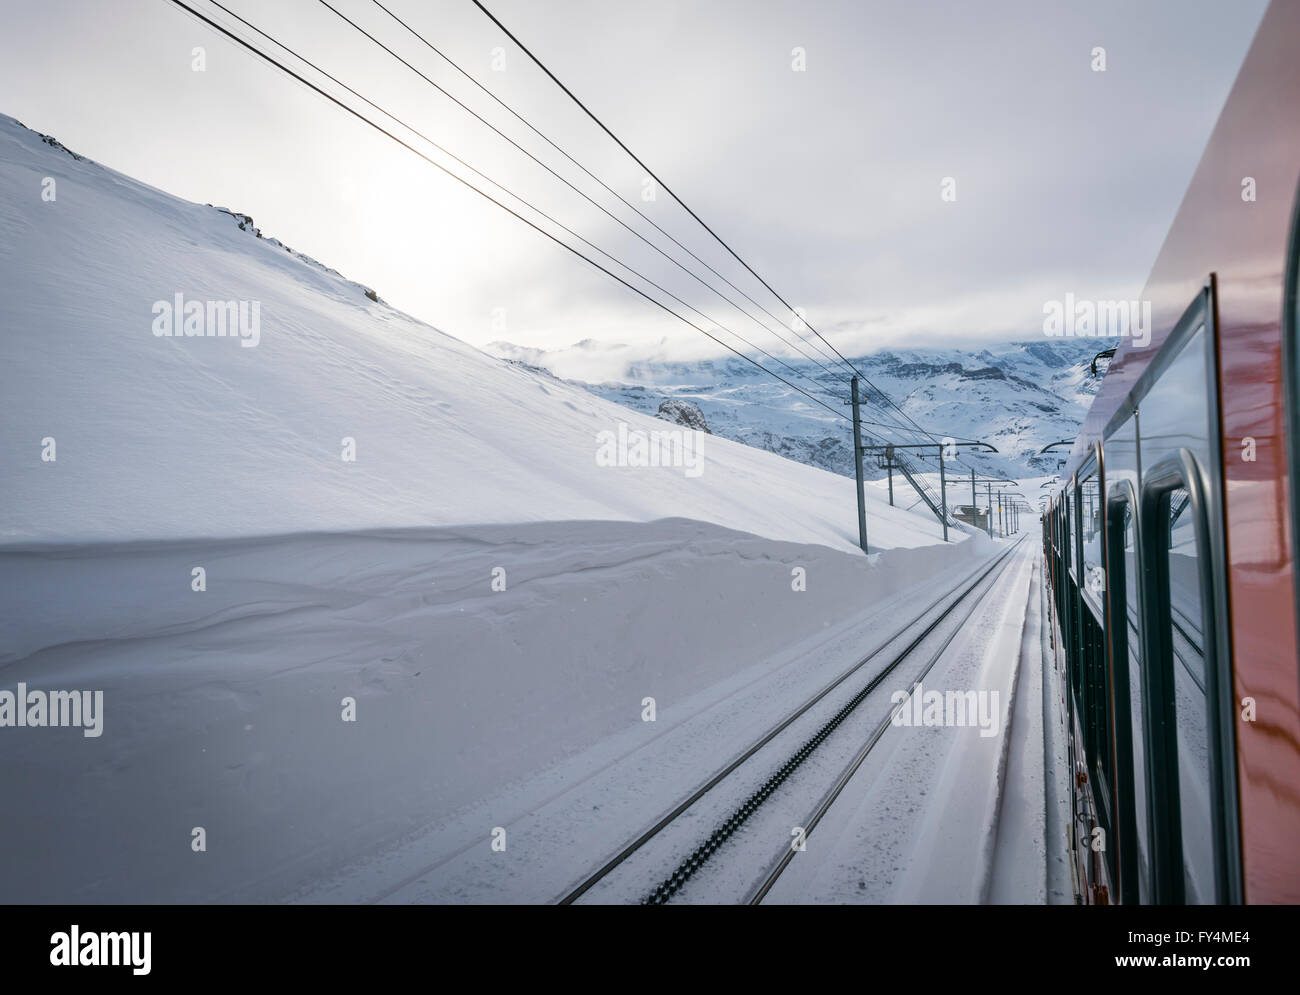 View from a train of the Gornergrat railway that leads from the Swiss village of Zermatt up to the summit of the Gornergrat. Stock Photo